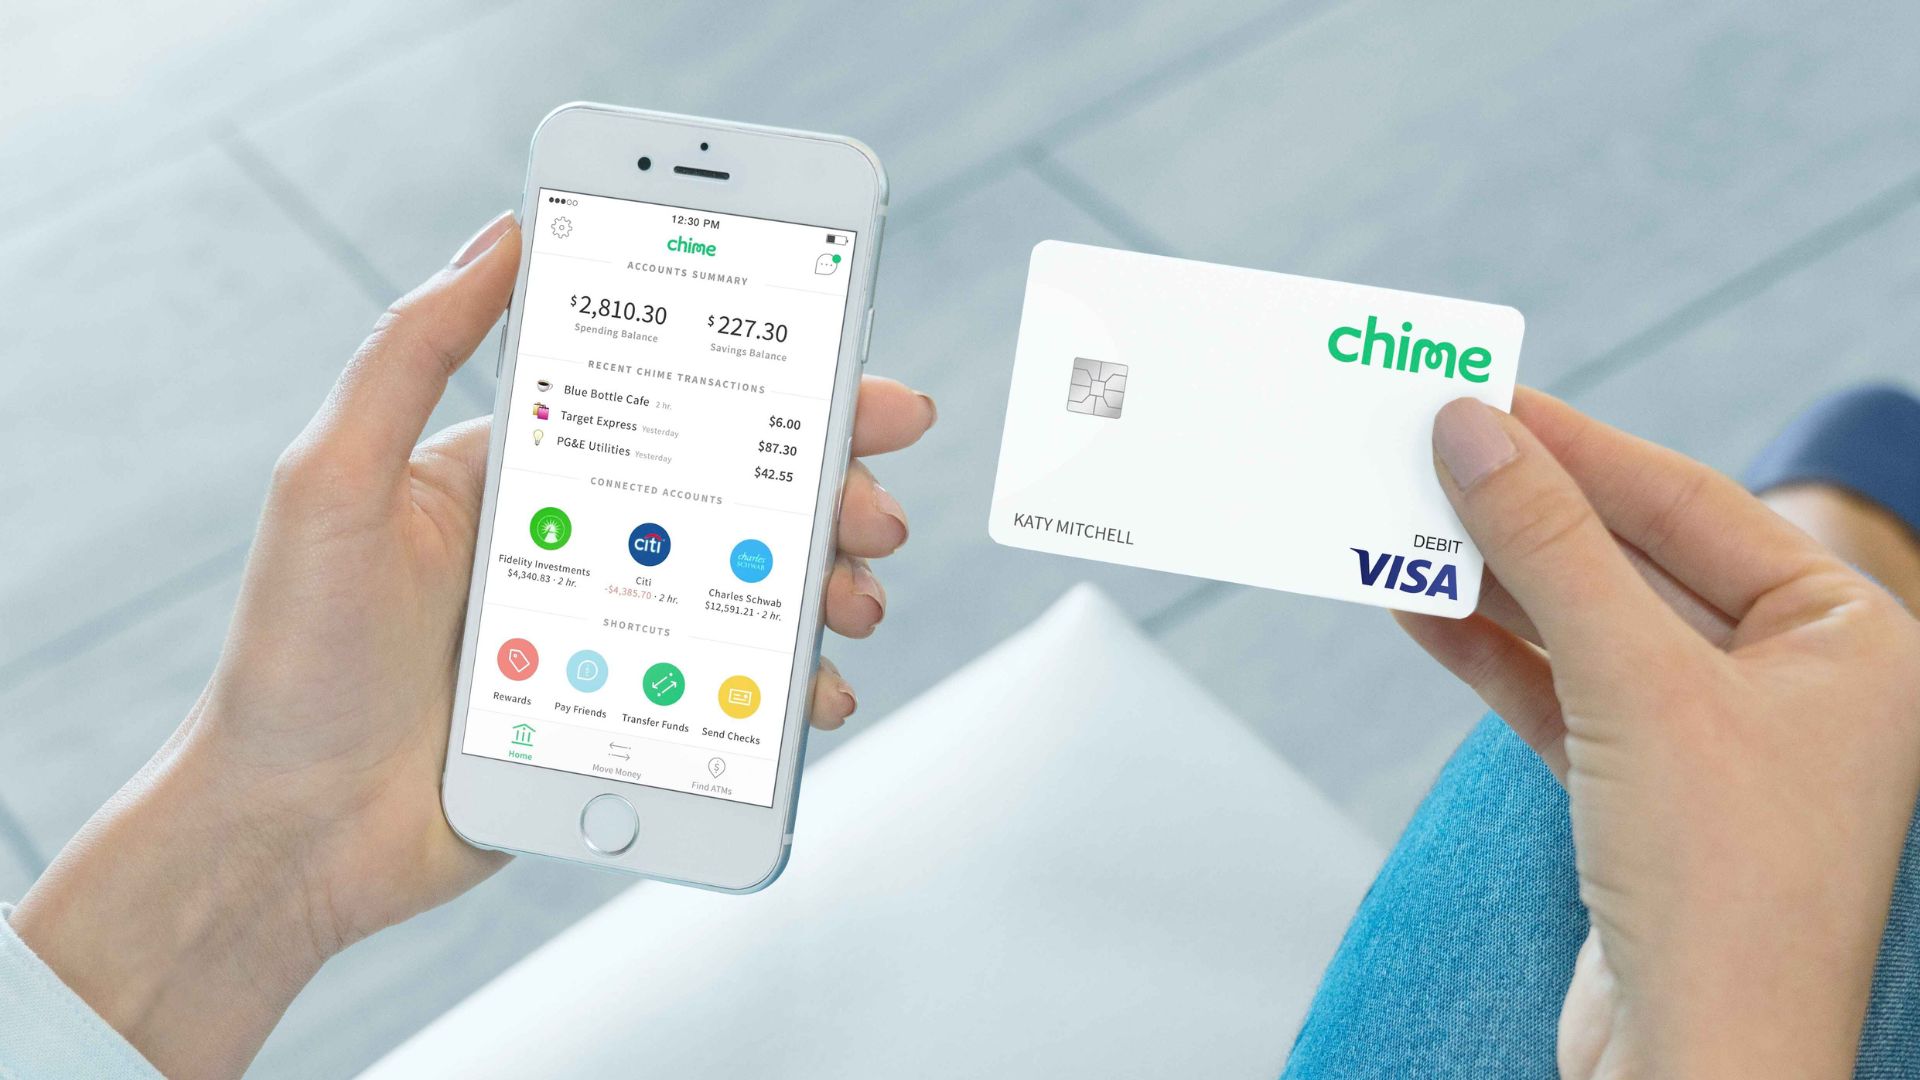 Where Can I Use Chime Card